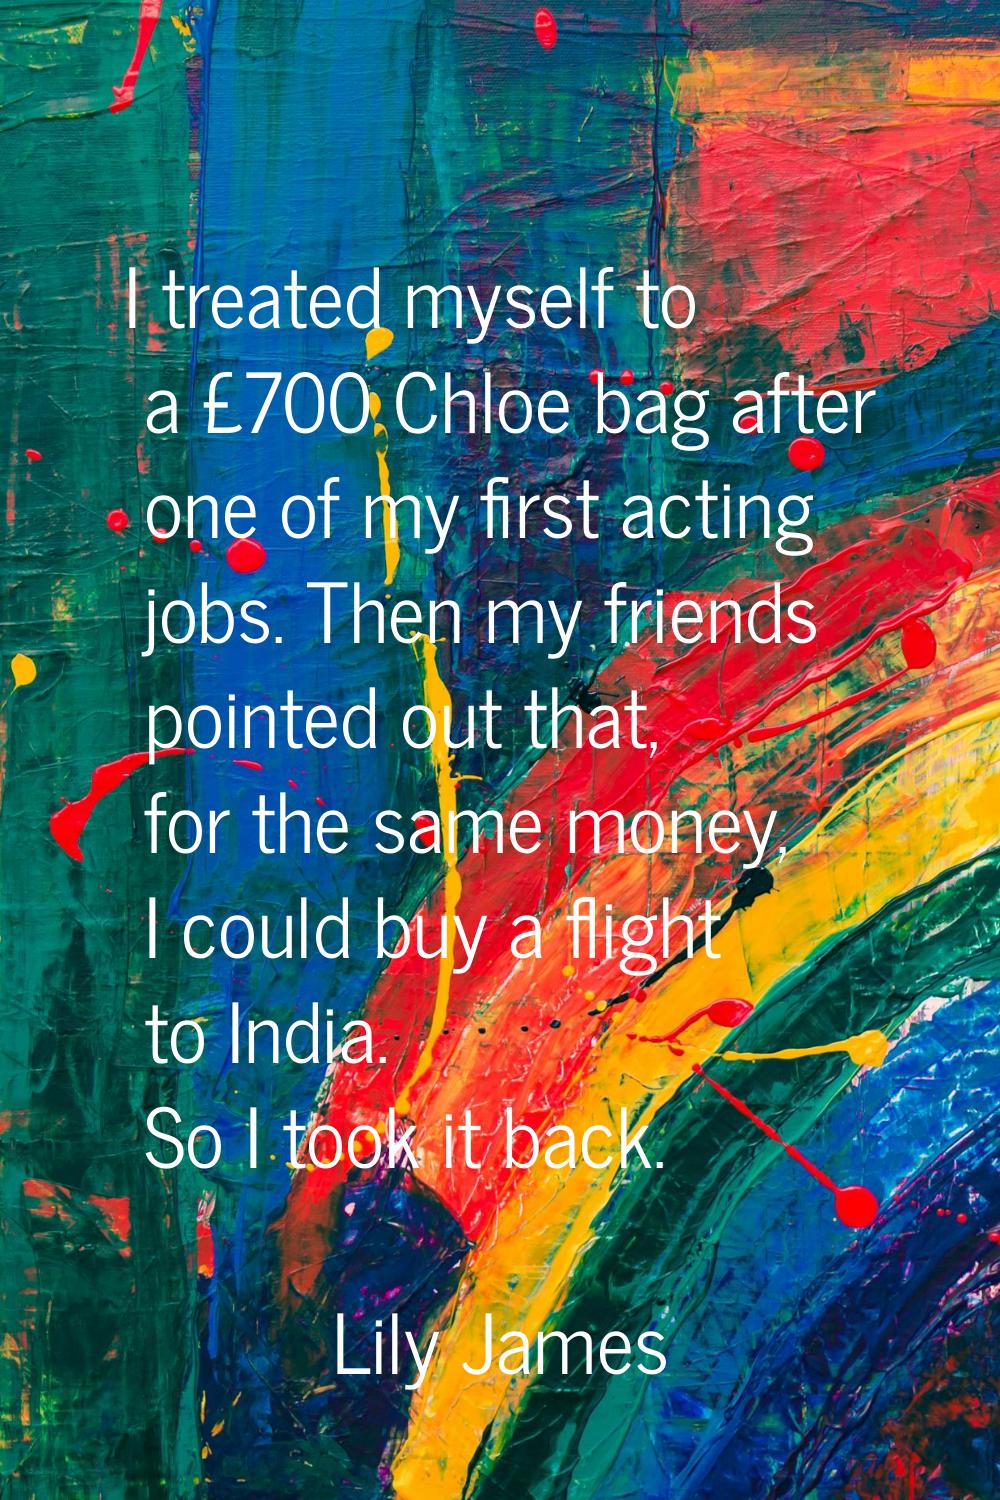 I treated myself to a £700 Chloe bag after one of my first acting jobs. Then my friends pointed out